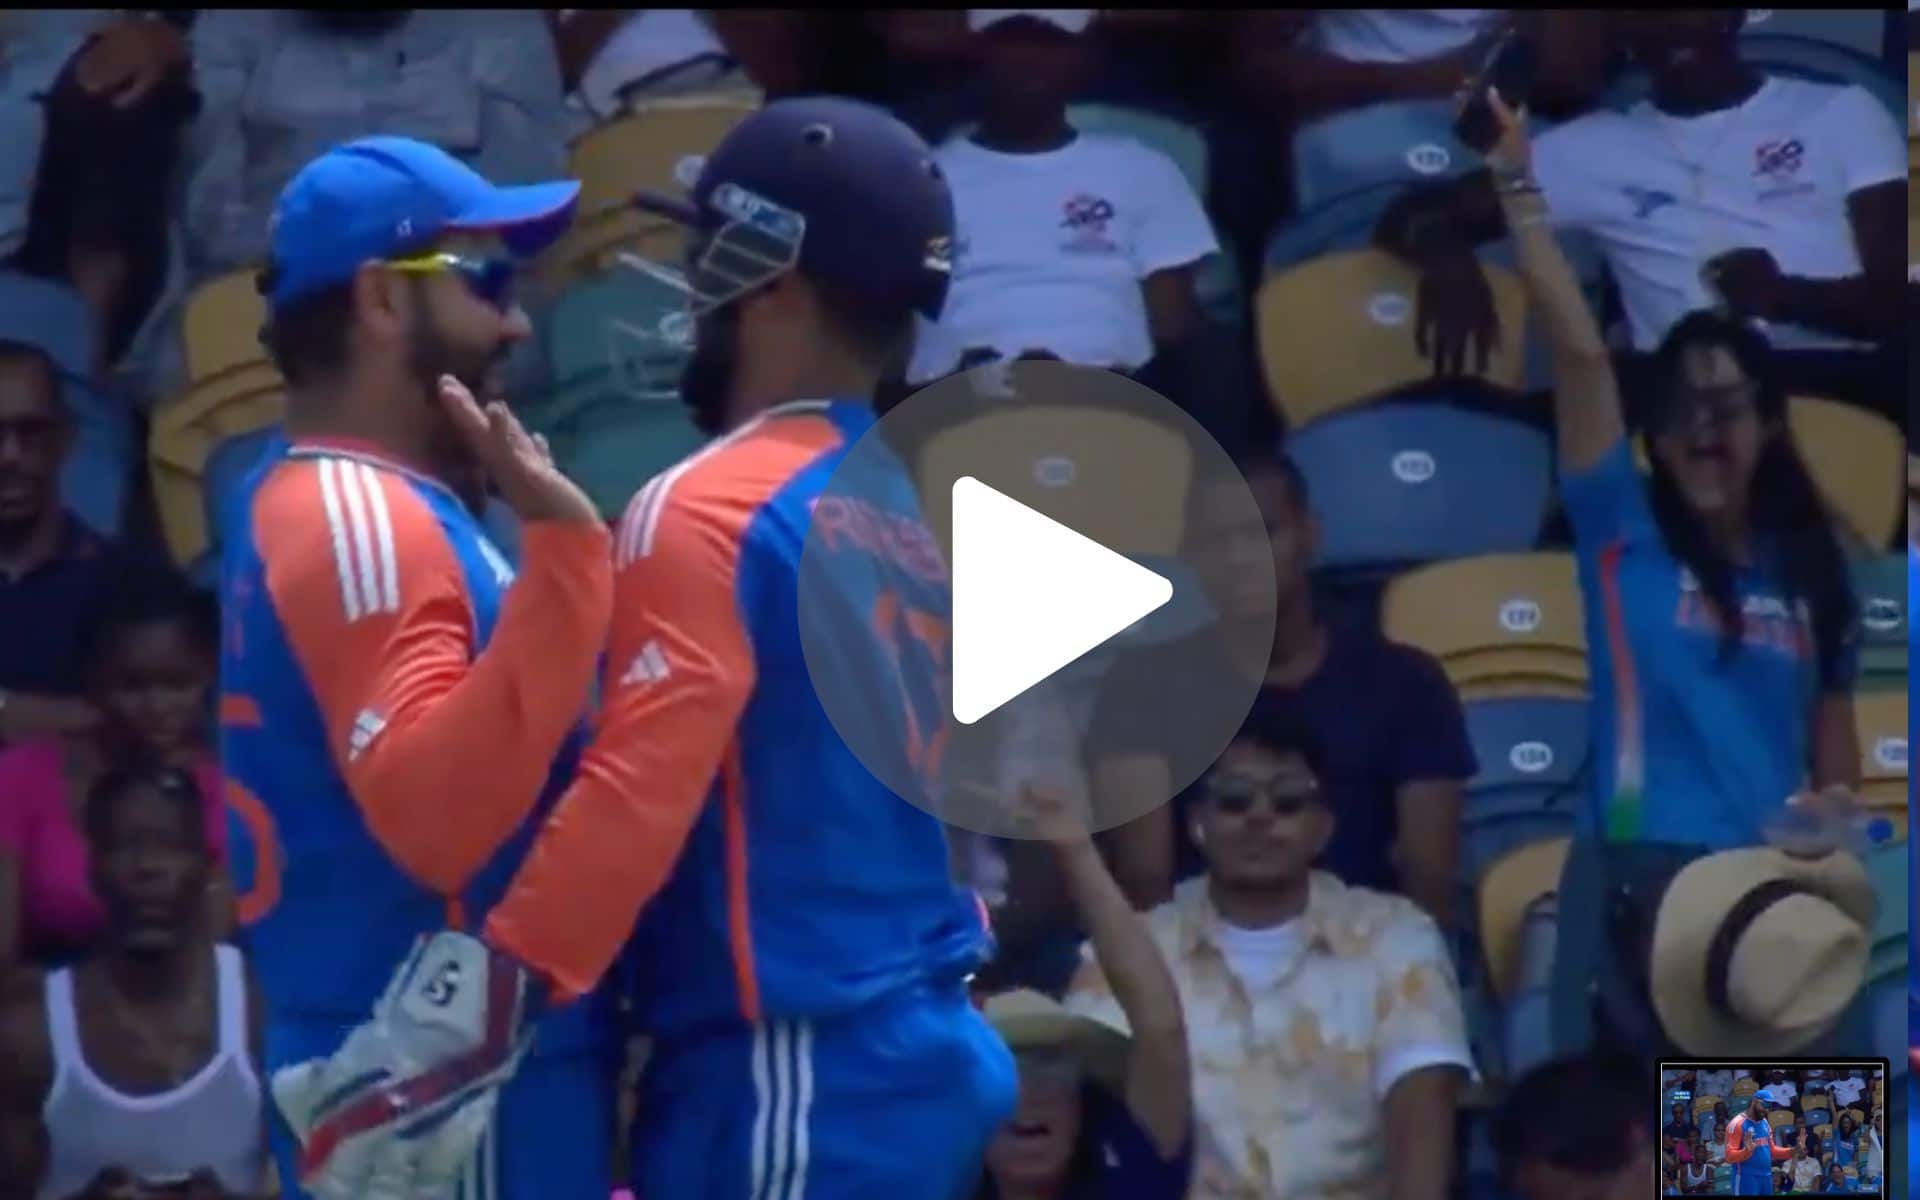 [Watch] 'Aaram Se, Aaram Se': Rohit Sharma Hilariously Asks 'Excited' Pant To Calm Down